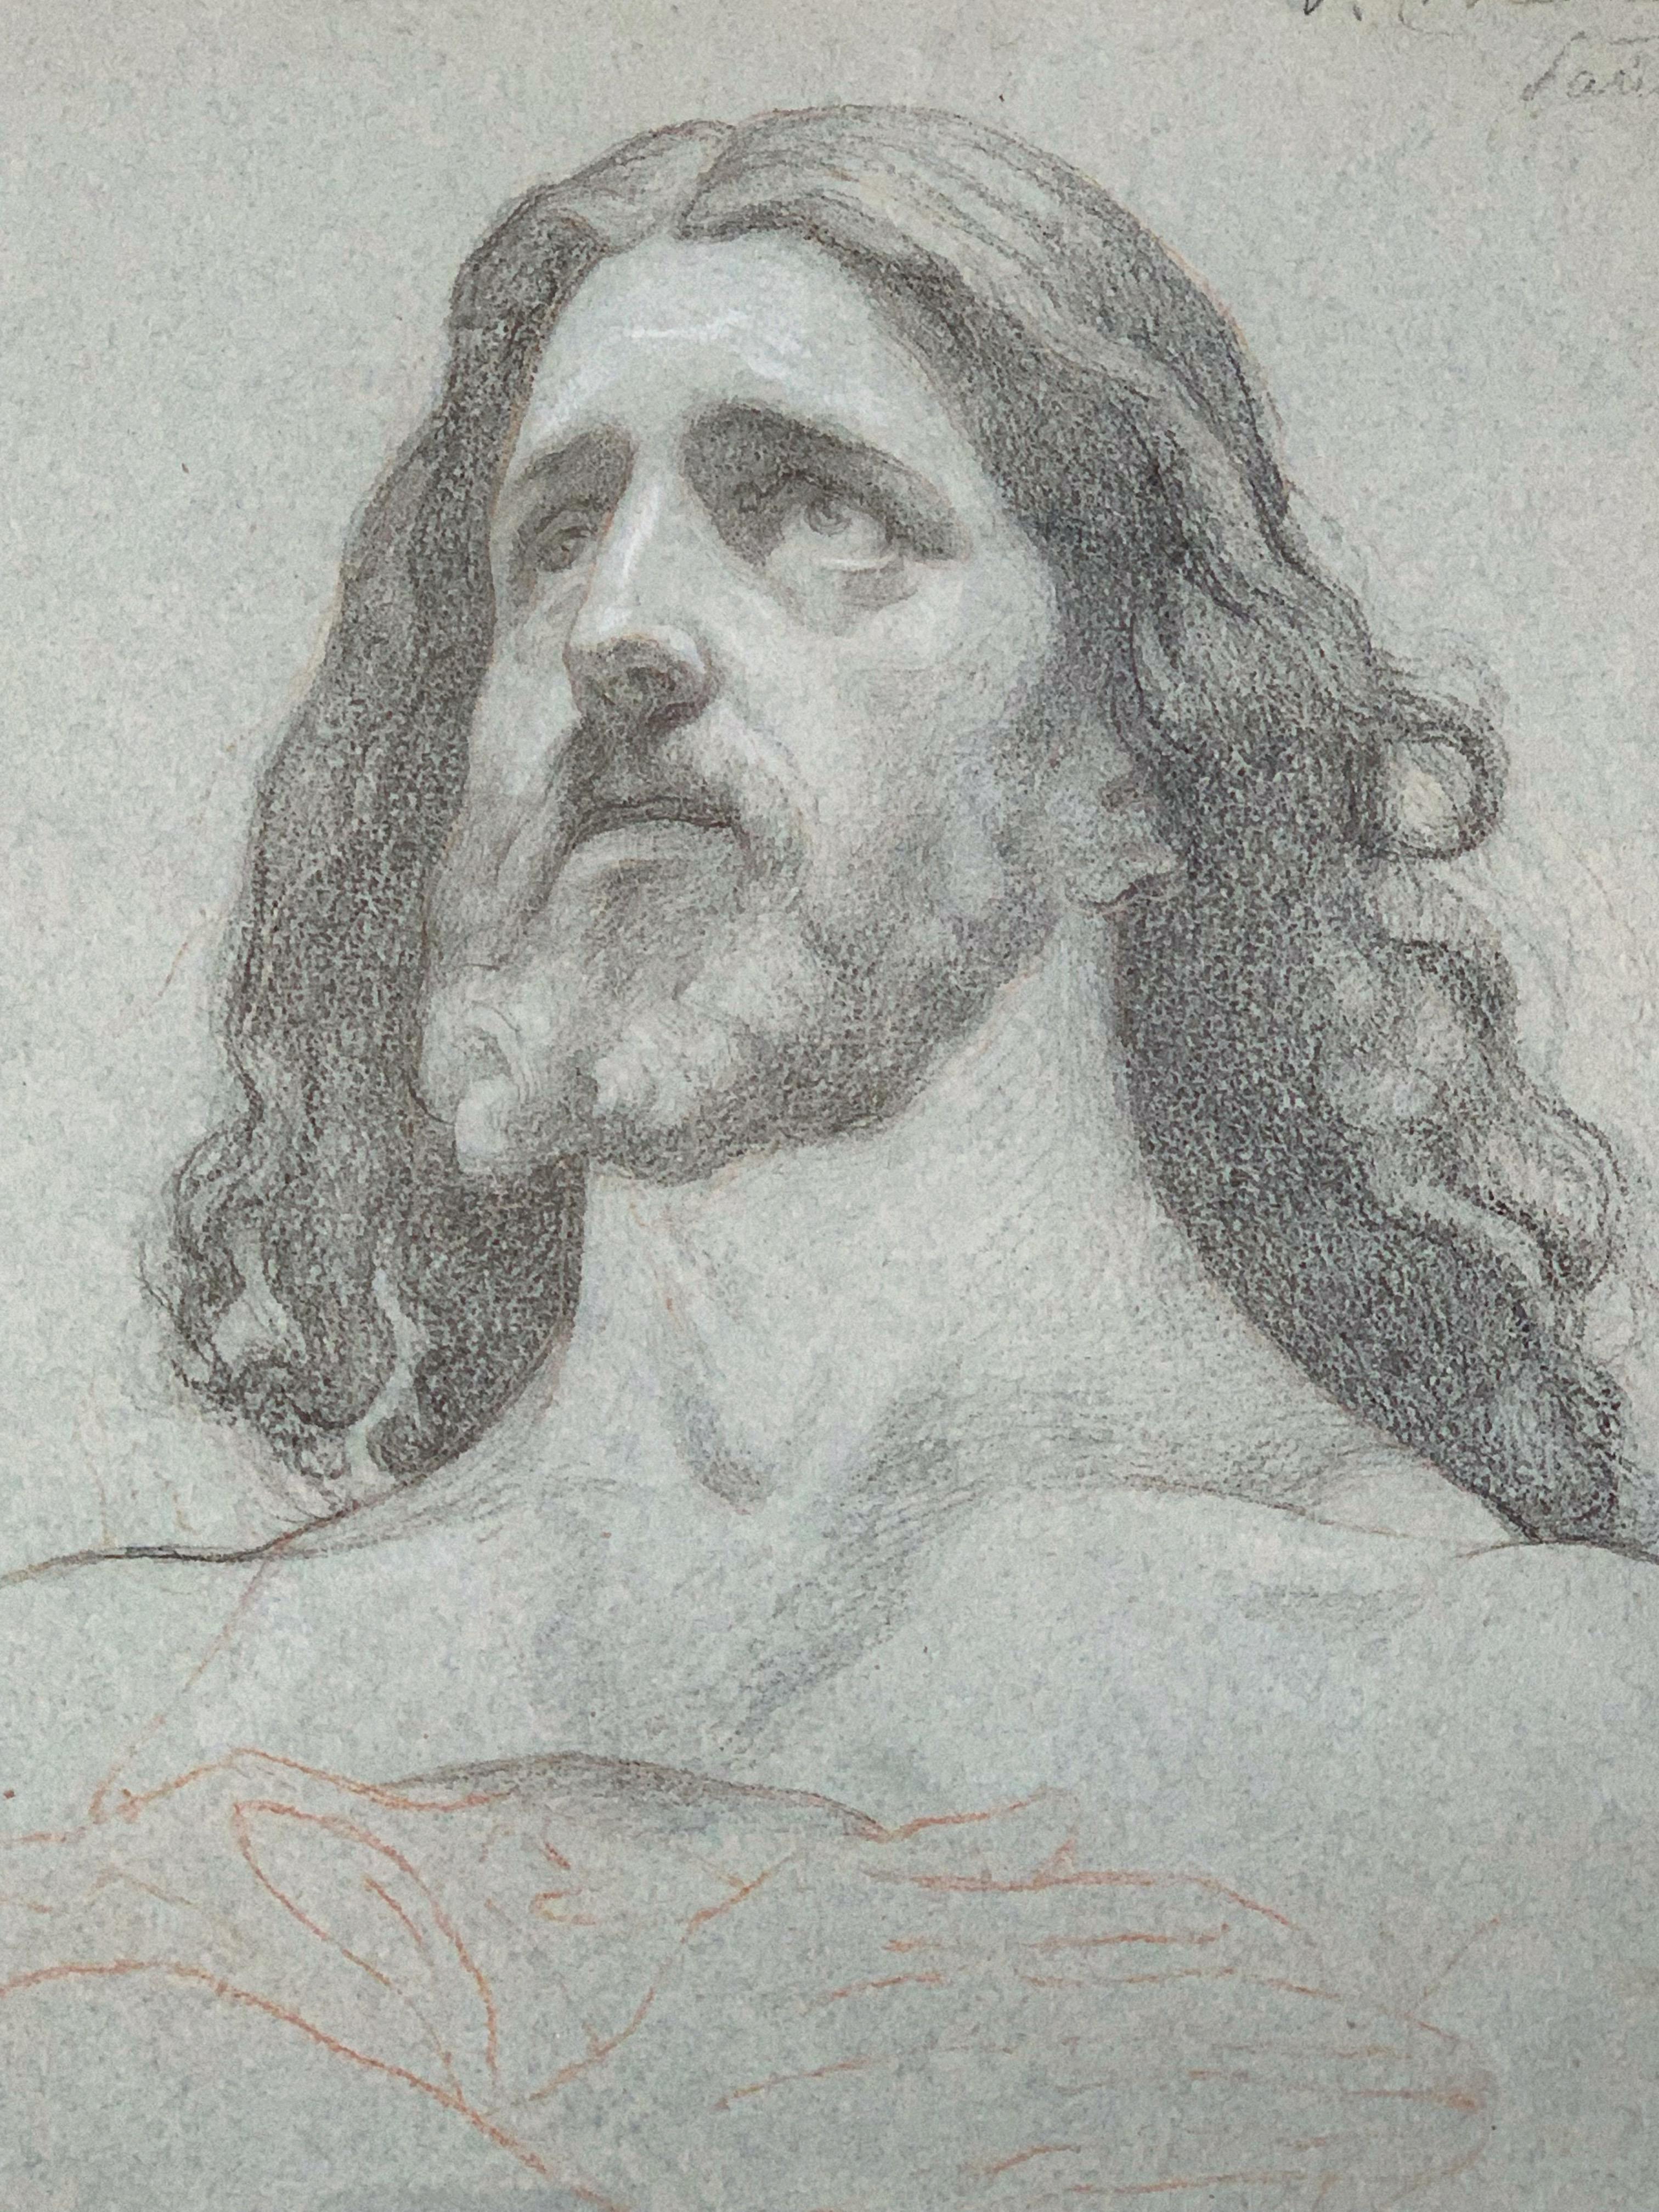 Study of Christ, hands crossed, three pencils on blue paper